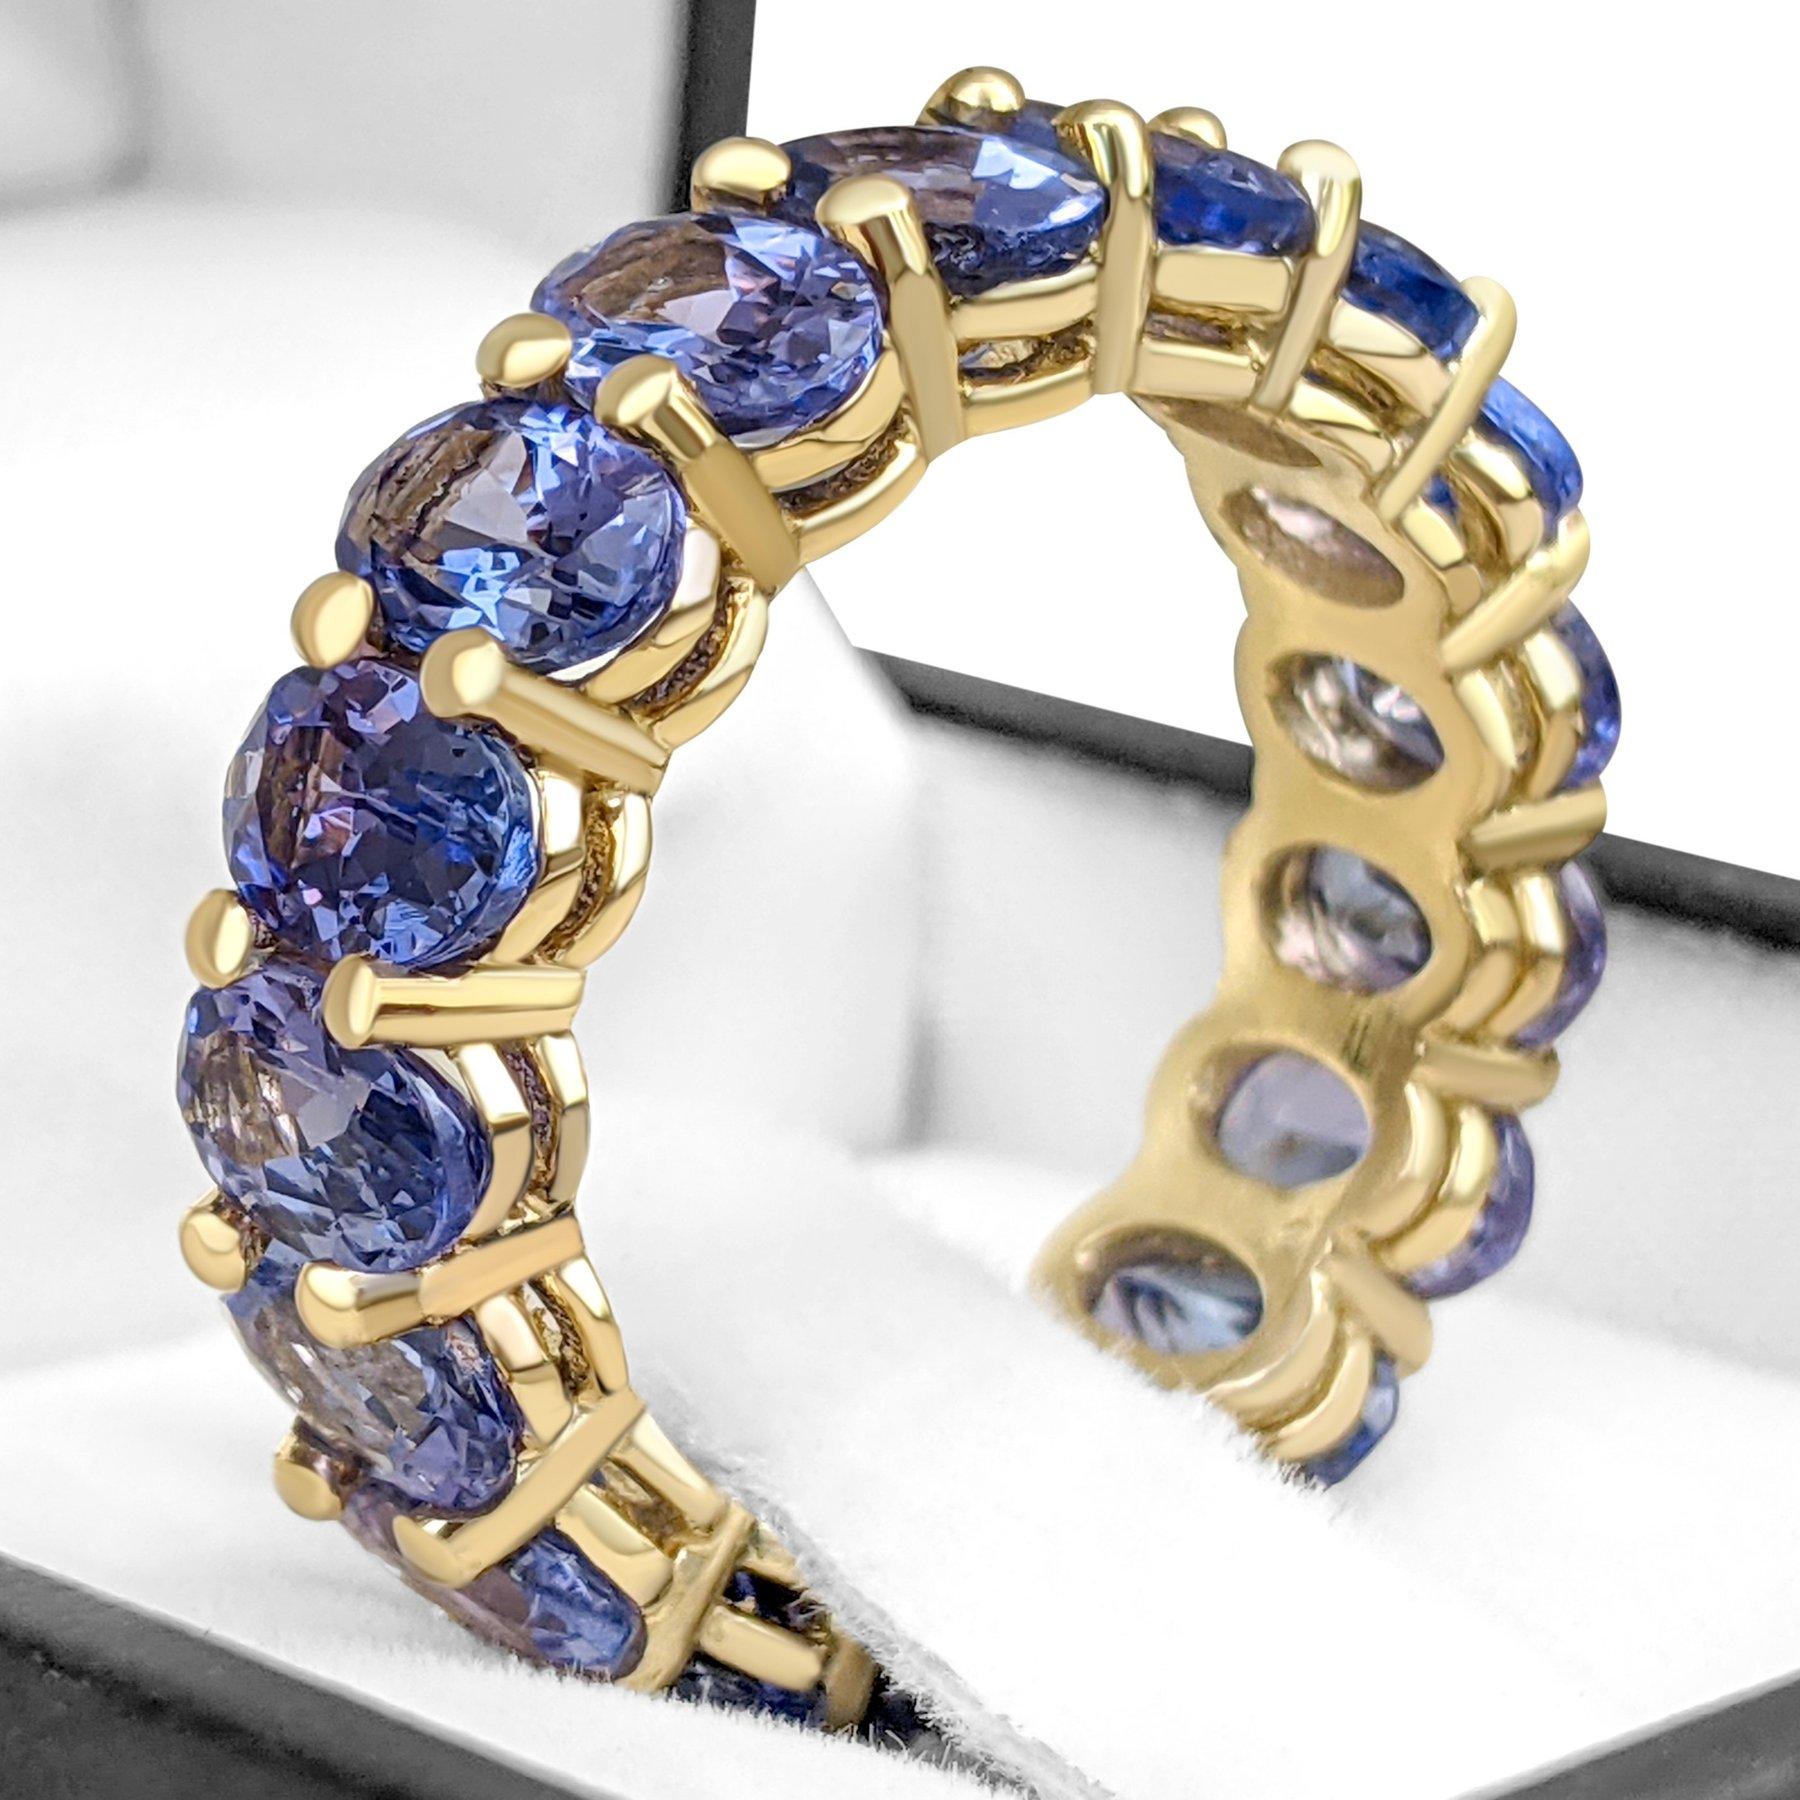 Women's NO RESERVE! 8.18 Carat Tanzanite Eternity Band - 14 kt. Yellow Gold - Ring For Sale